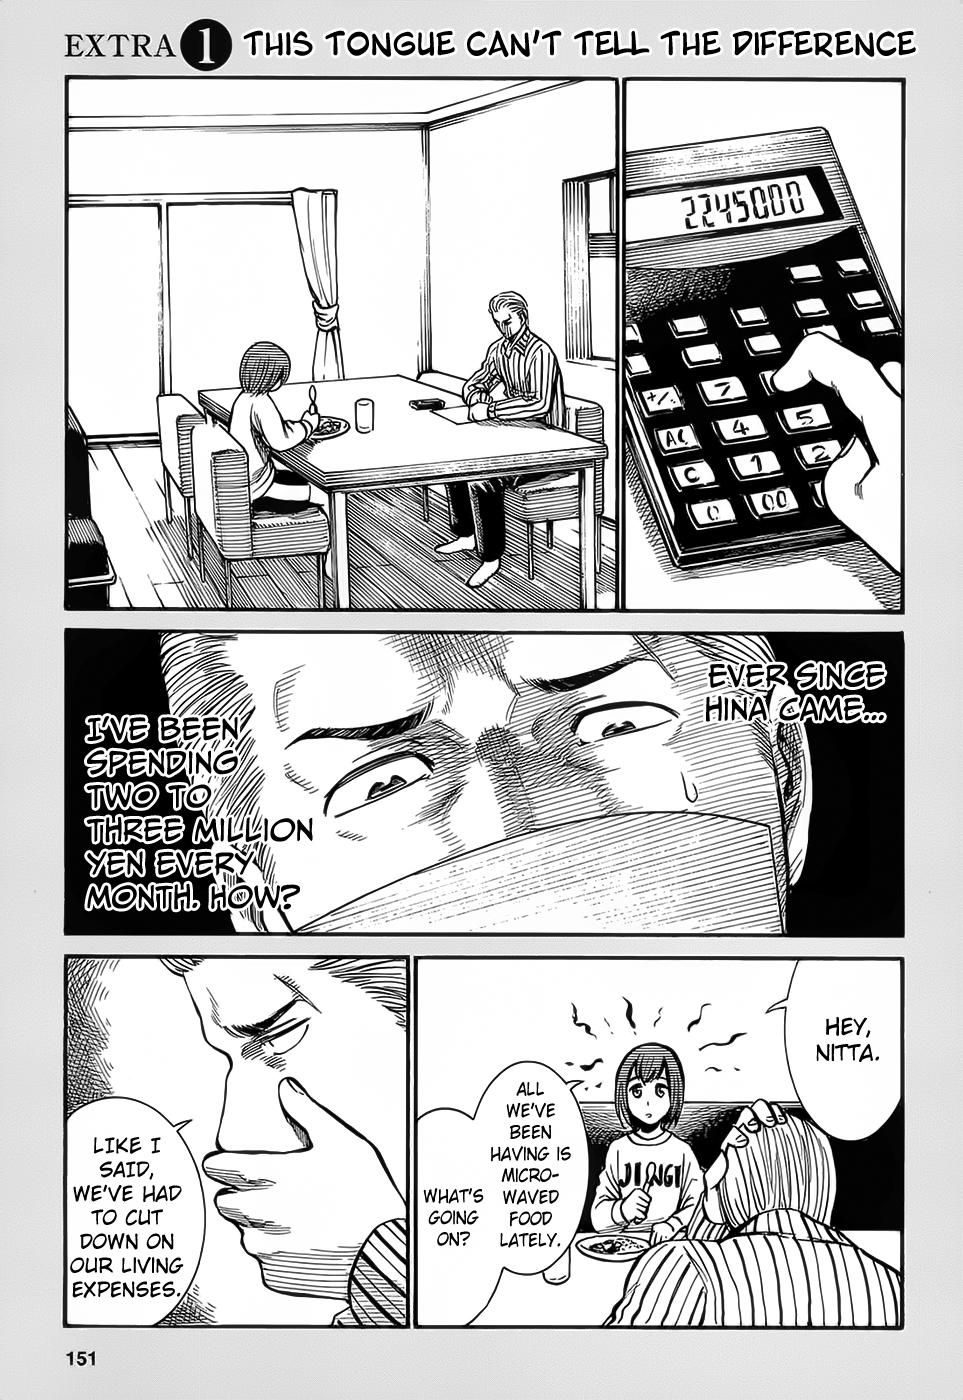 Hinamatsuri Vol.1-Chapter.4.5-This-Tongue-Can't-Tell-The-Difference Image